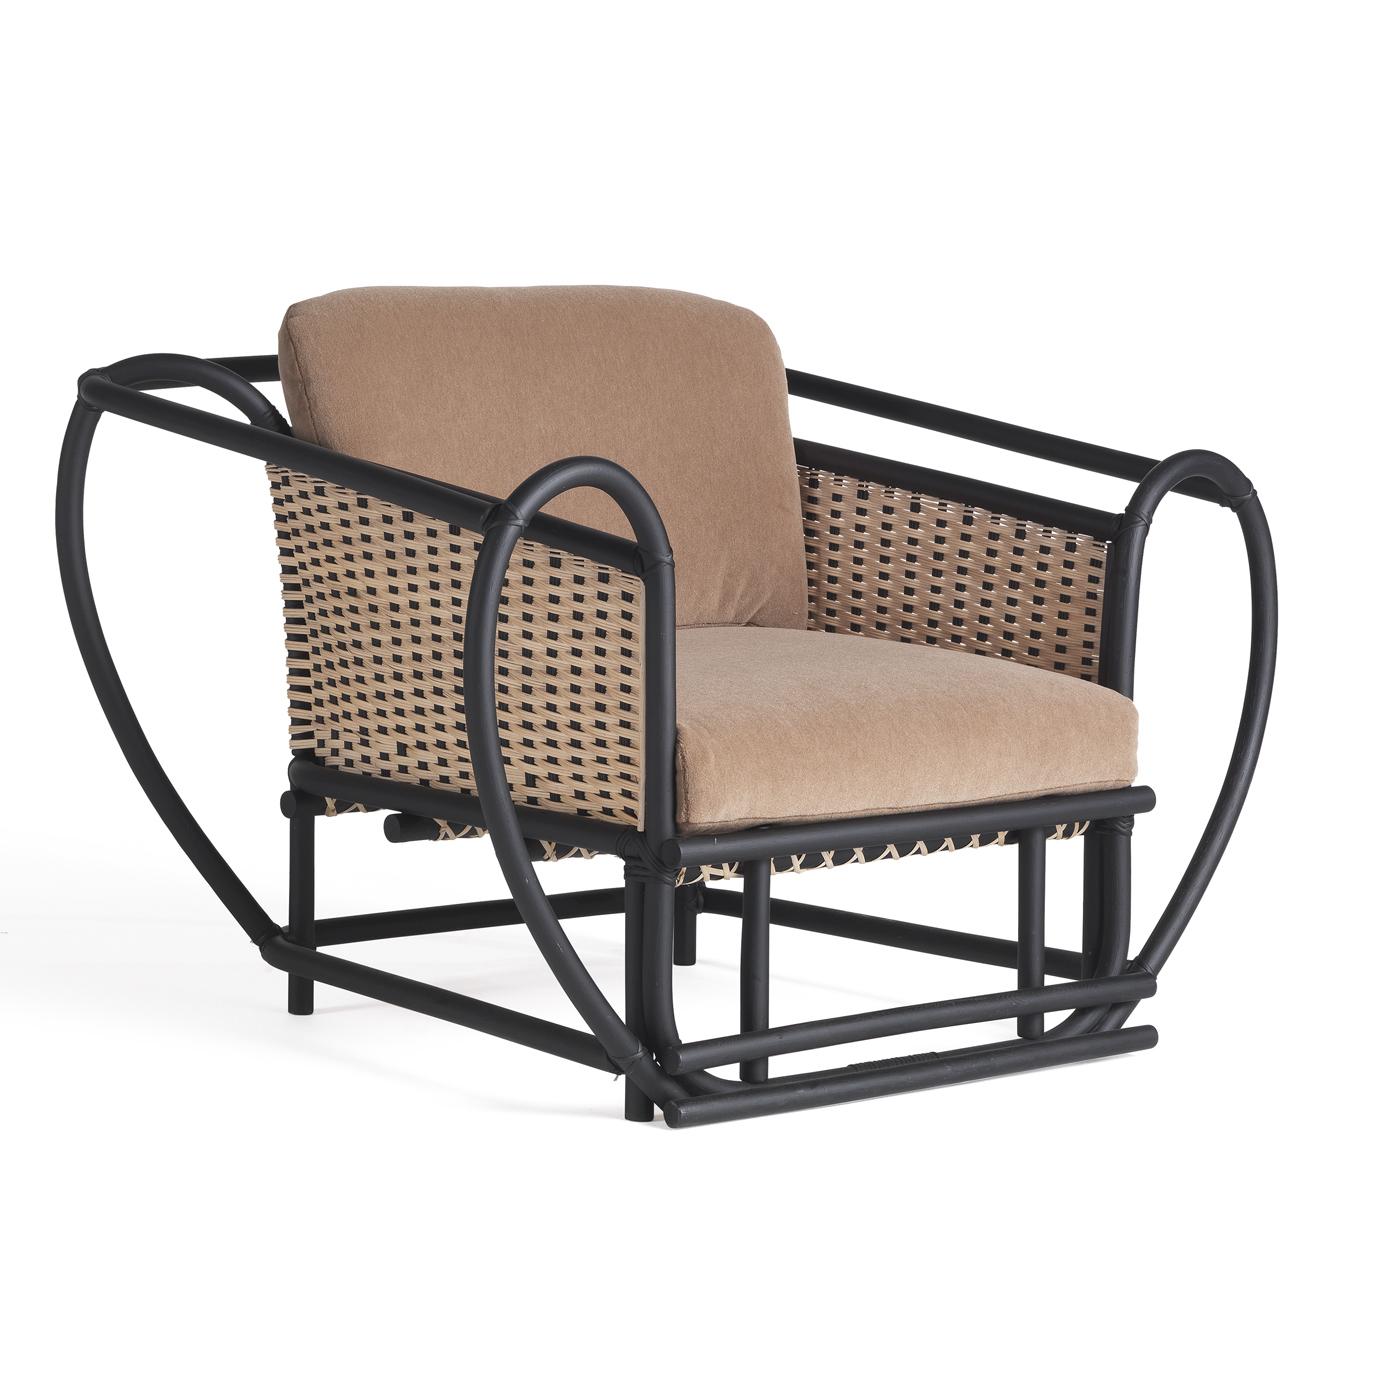 An innovative design of unique sophistication, this stunning armchair is marked by a magnificent structure made of black reed enclosing the comfortable seat in a captivating, sinuous silhouette. Enriched with a Classic braiding of rope, the seat